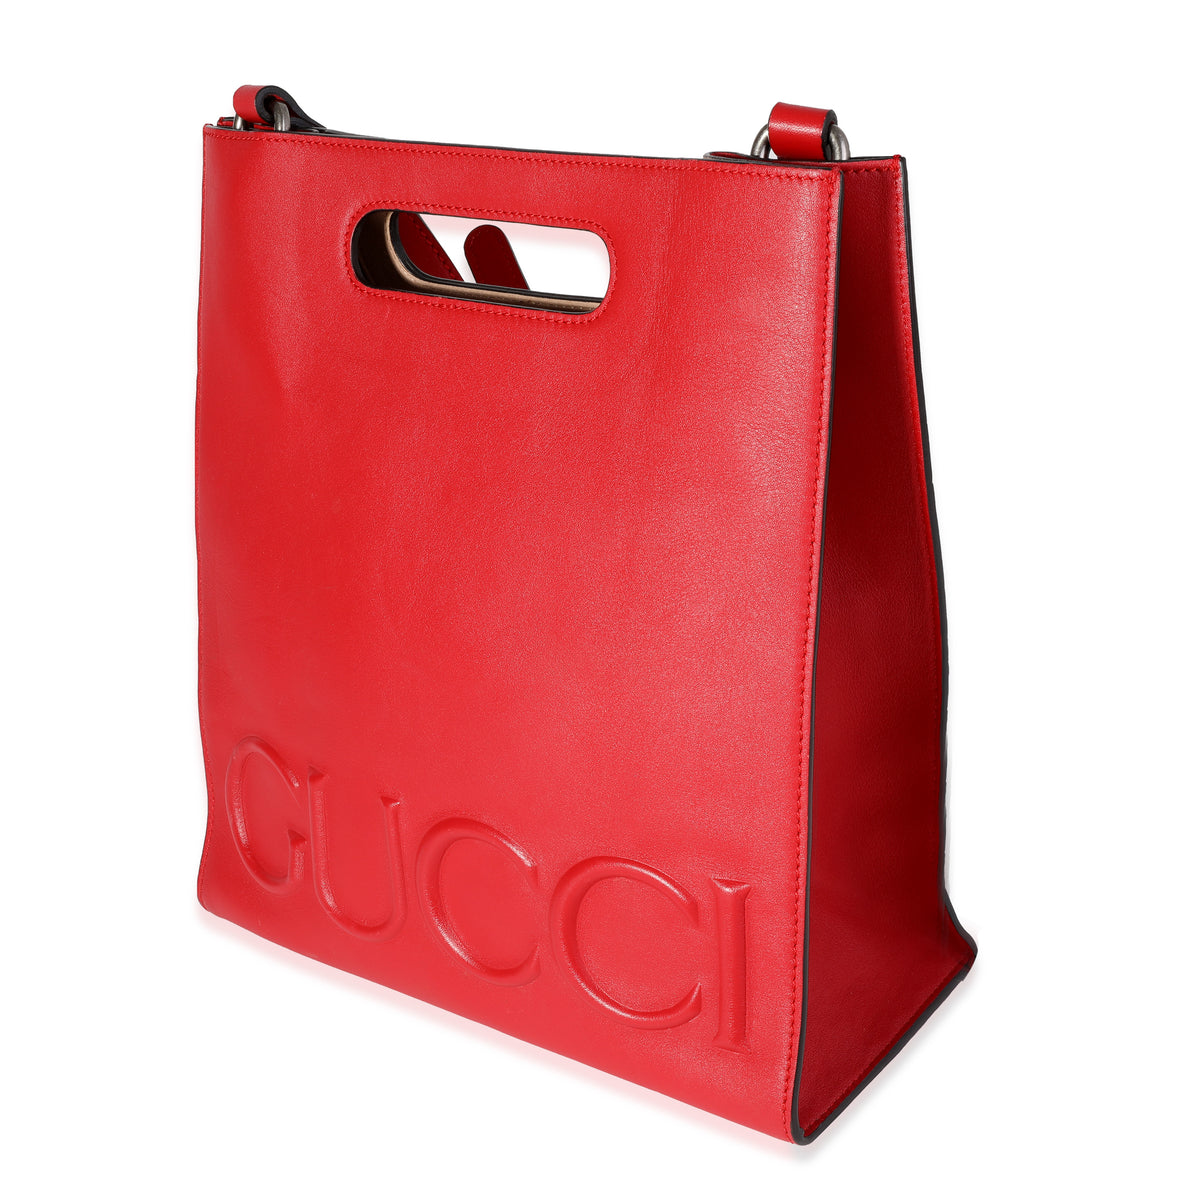 Gucci Red Leather Embossed Logo Tote